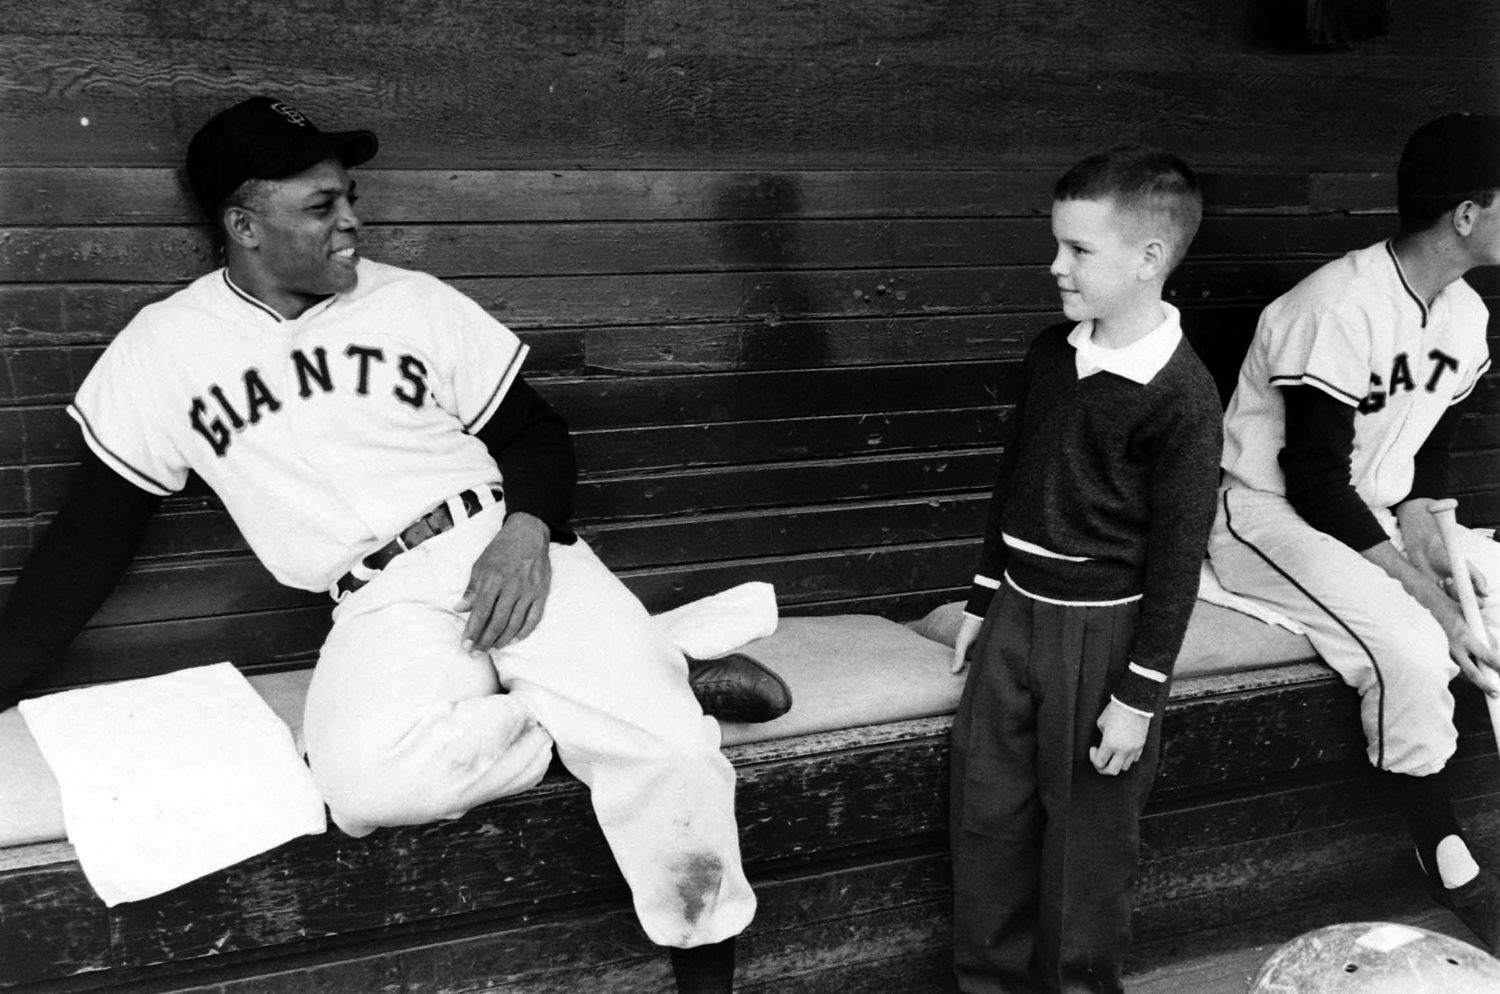 Willie Mays and young fan, San Francisco, 1958.